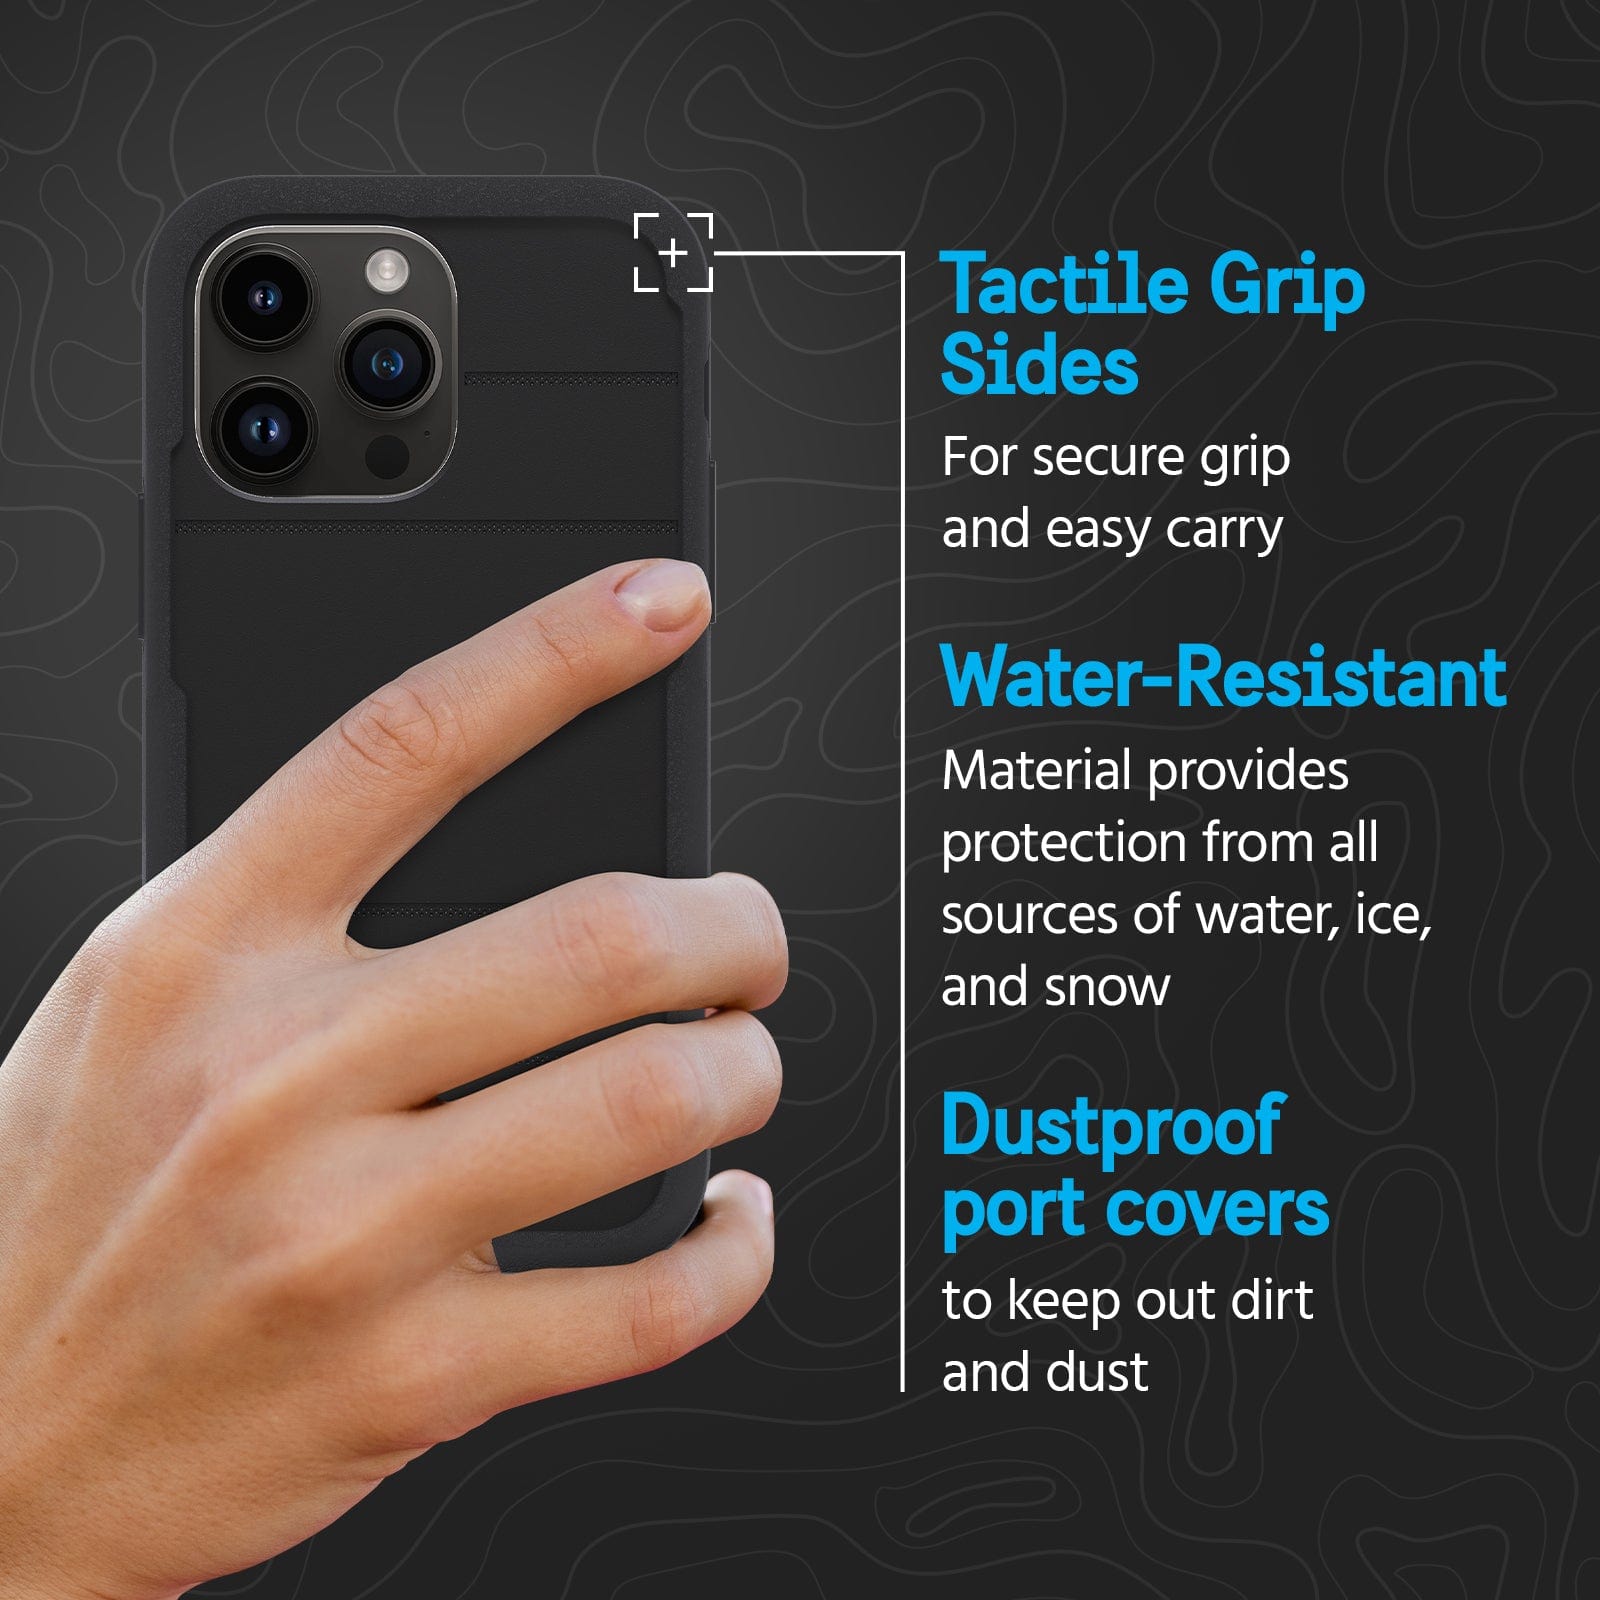 TACTILE GRIP SIDES FOR SECURE AND EASY CARRY. WATER RESISTANT MATERIAL PROVIDES PROTECTION FROM ALL SOURCES OF WATER, ICE AND SNOW. DUSTPROOF PORT COVERS TO KEEP OUT DIRT AND DUST.